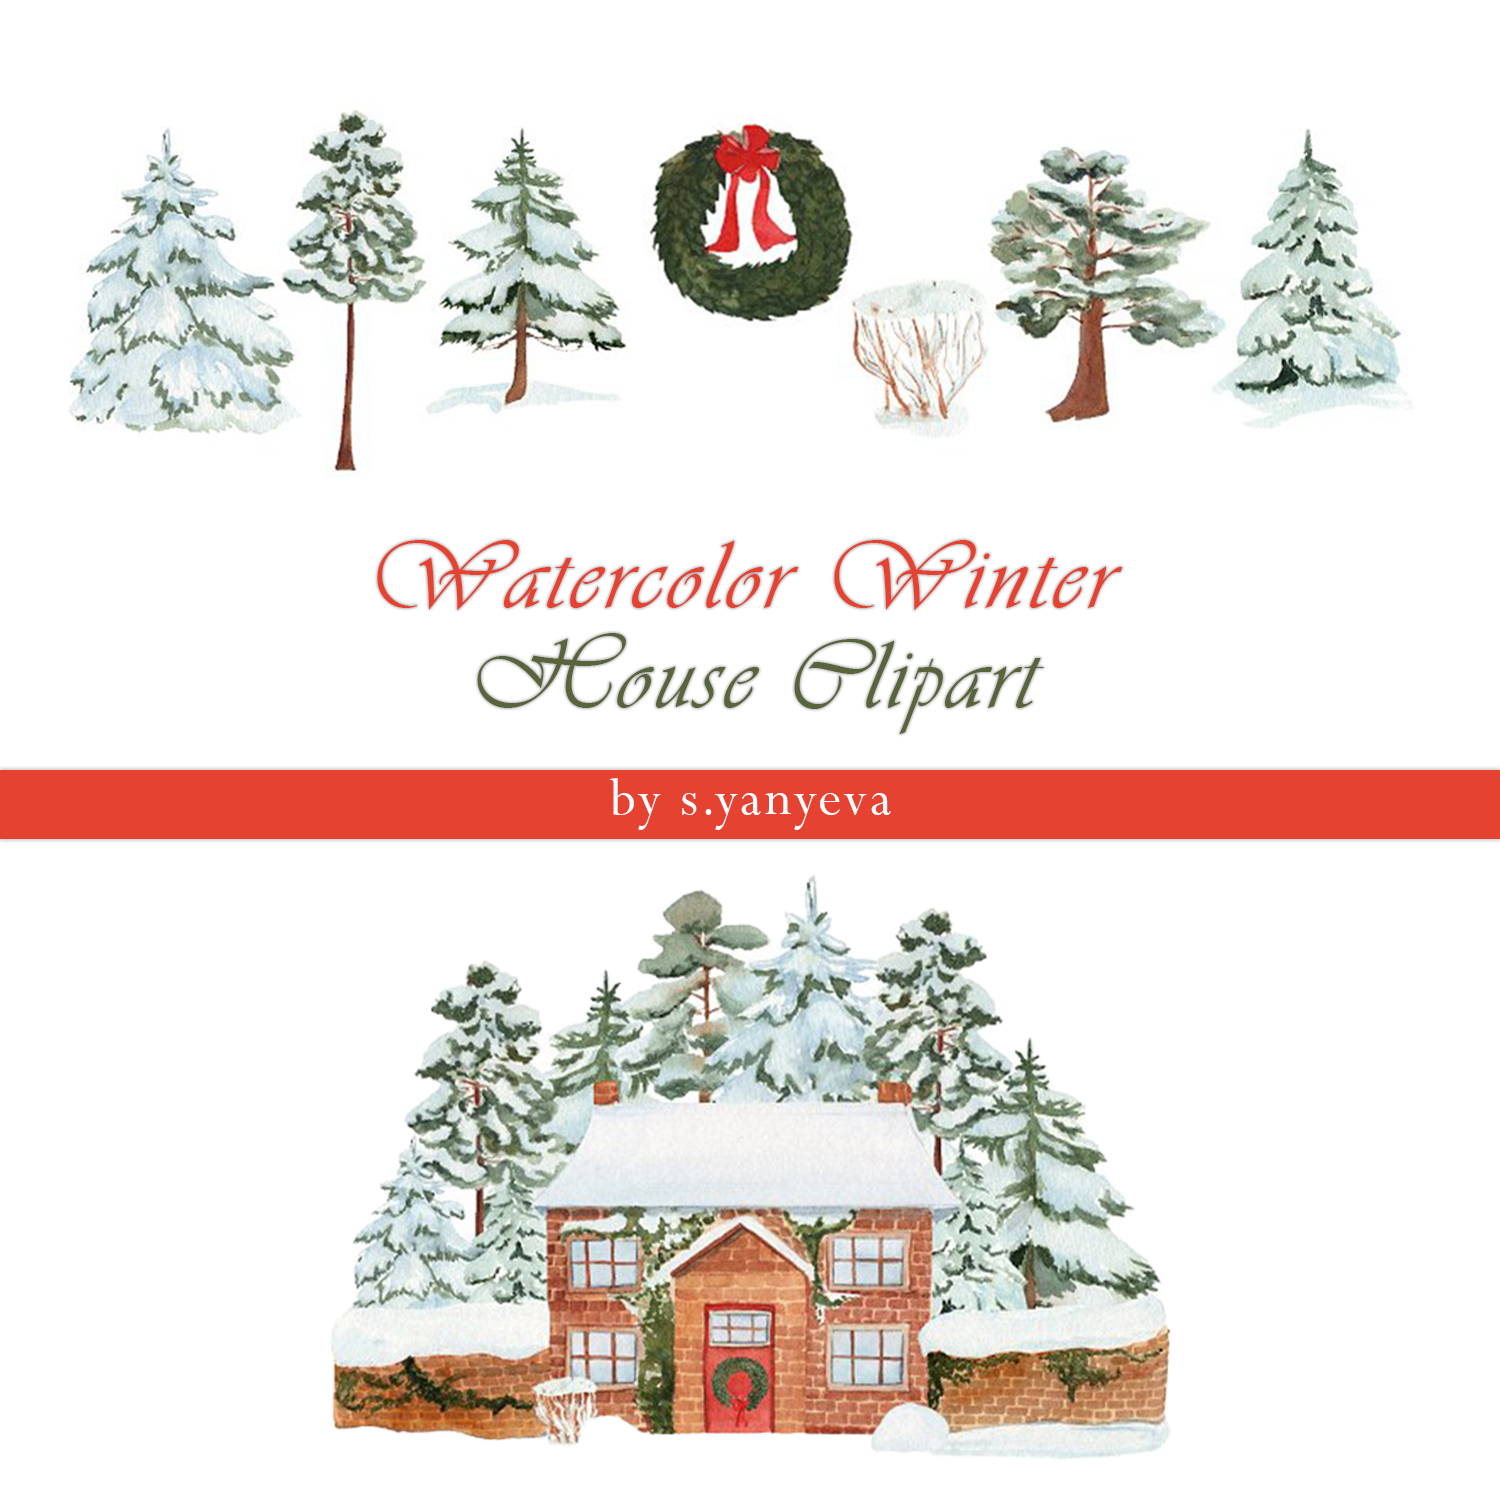 Watercolor winter house clipart preview.